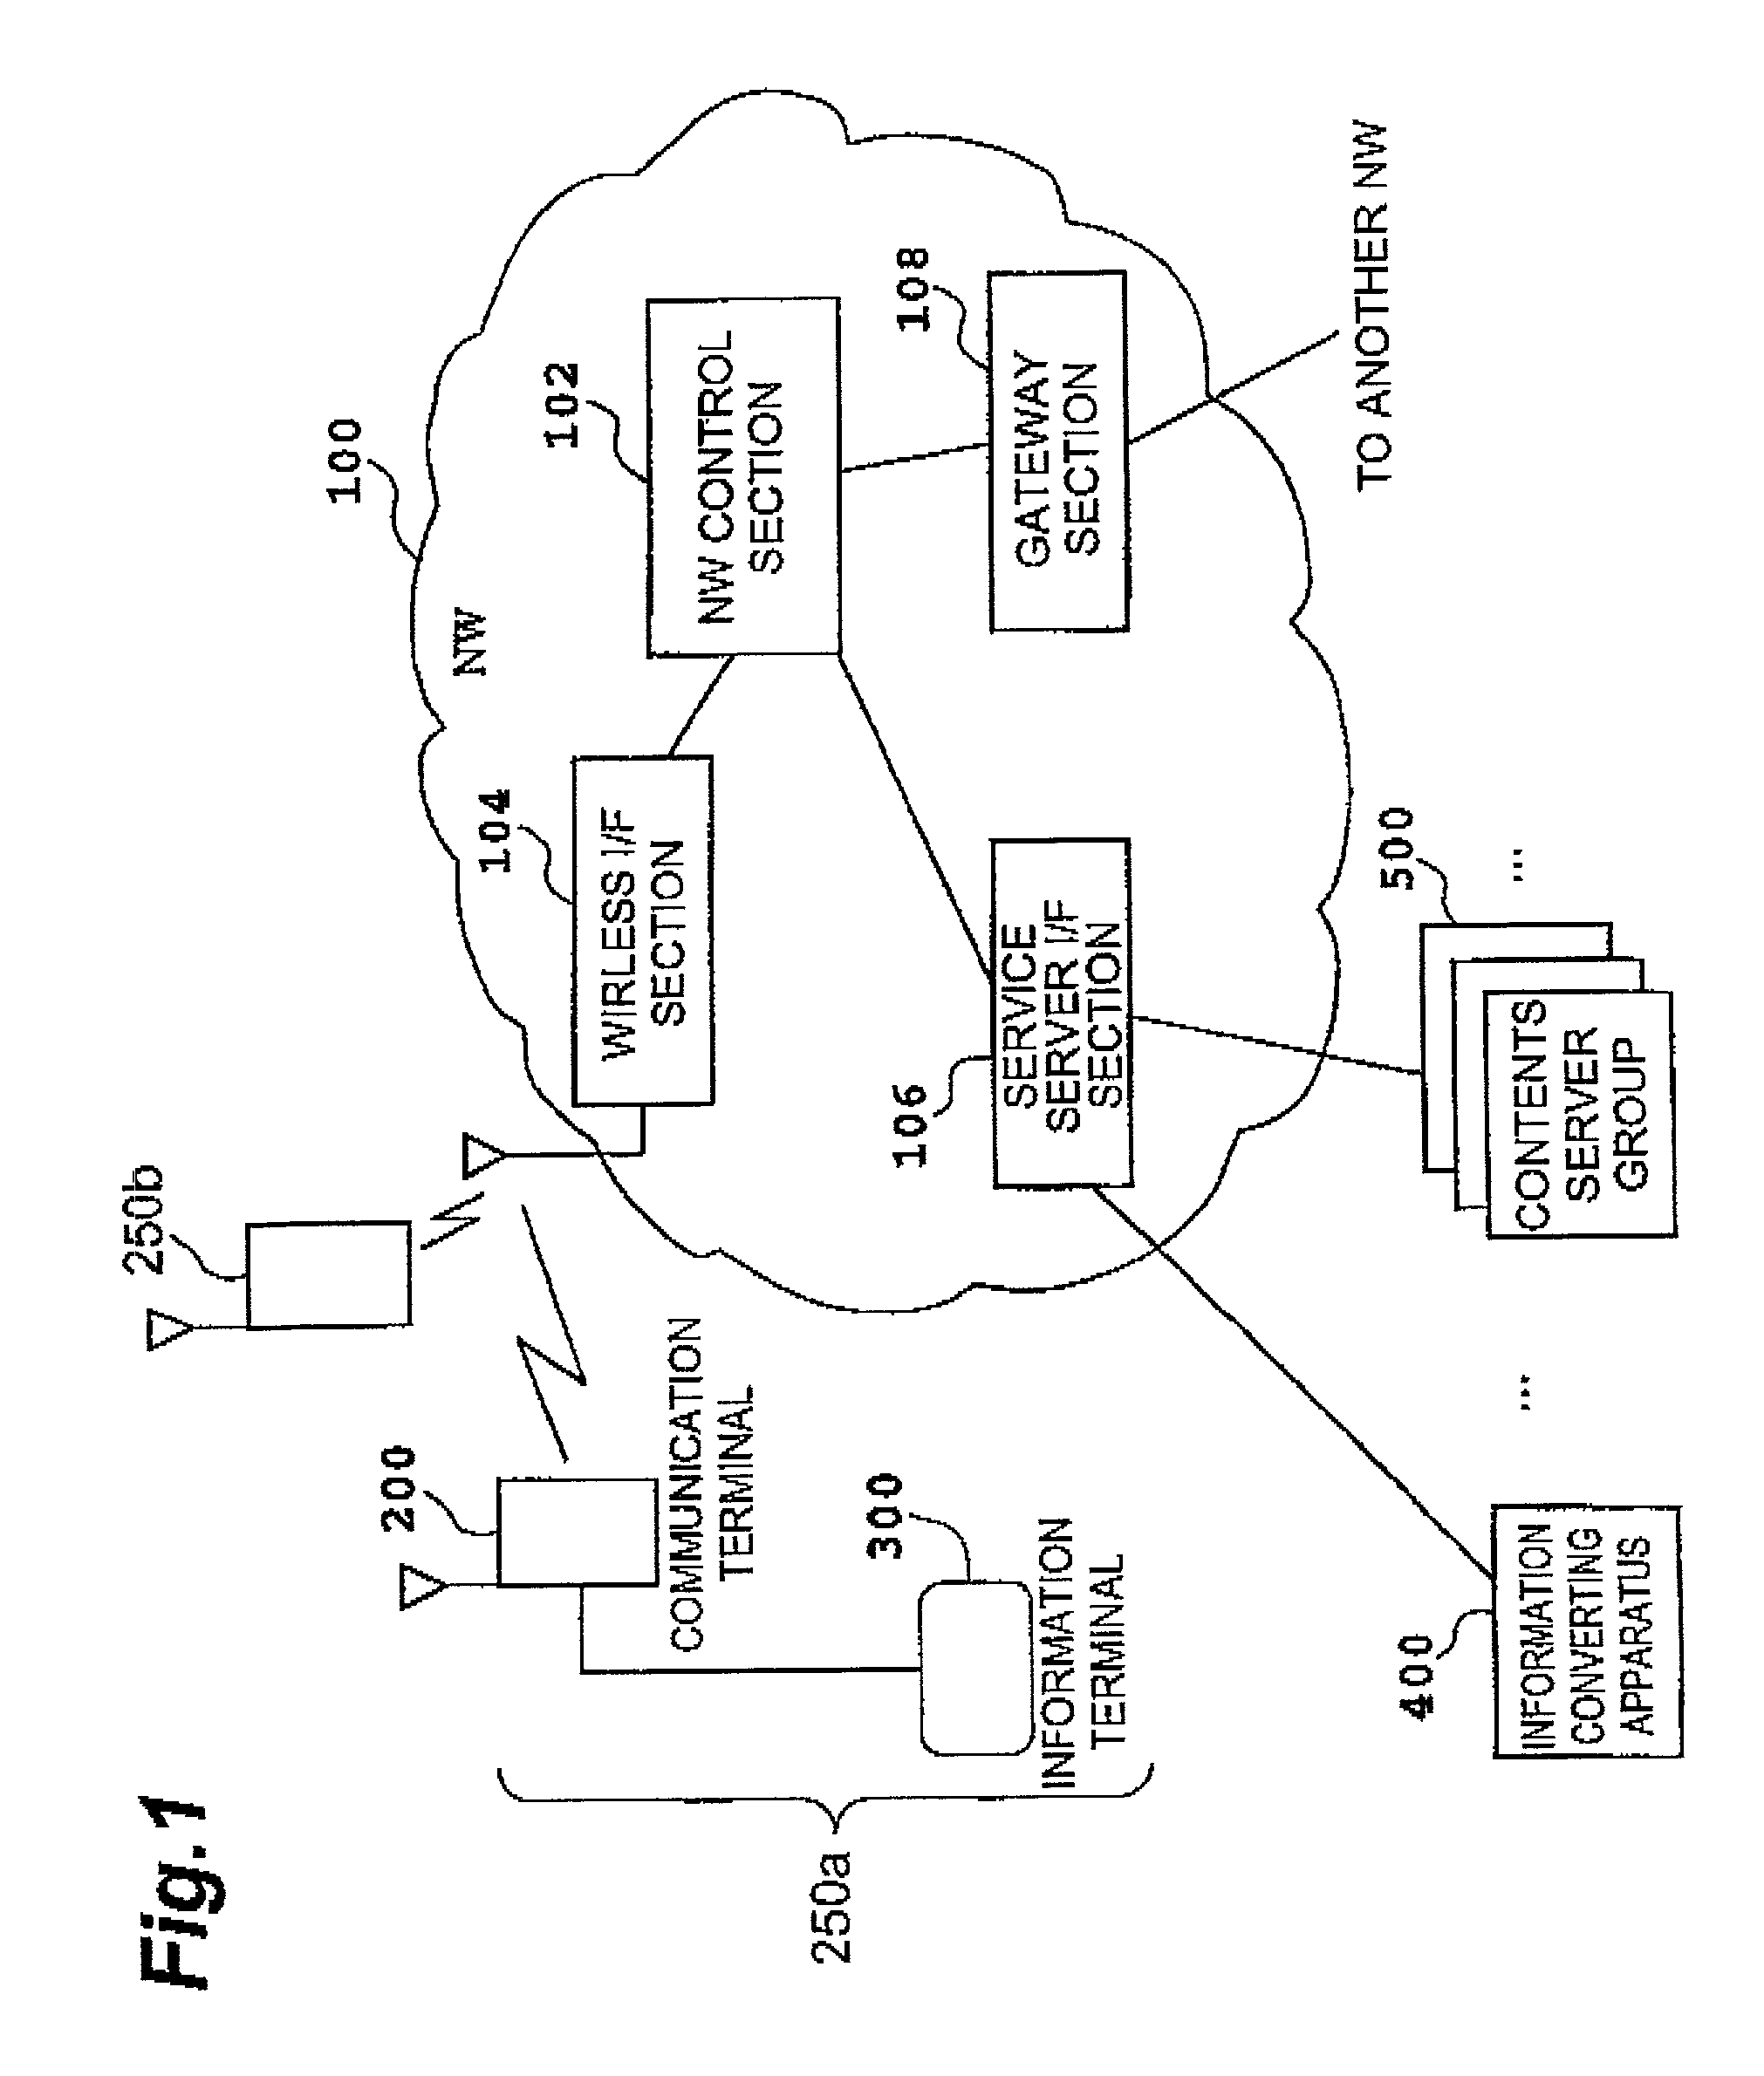 Mobile communication system, resource switching method thereof, network control apparatus included therein, same and network control method